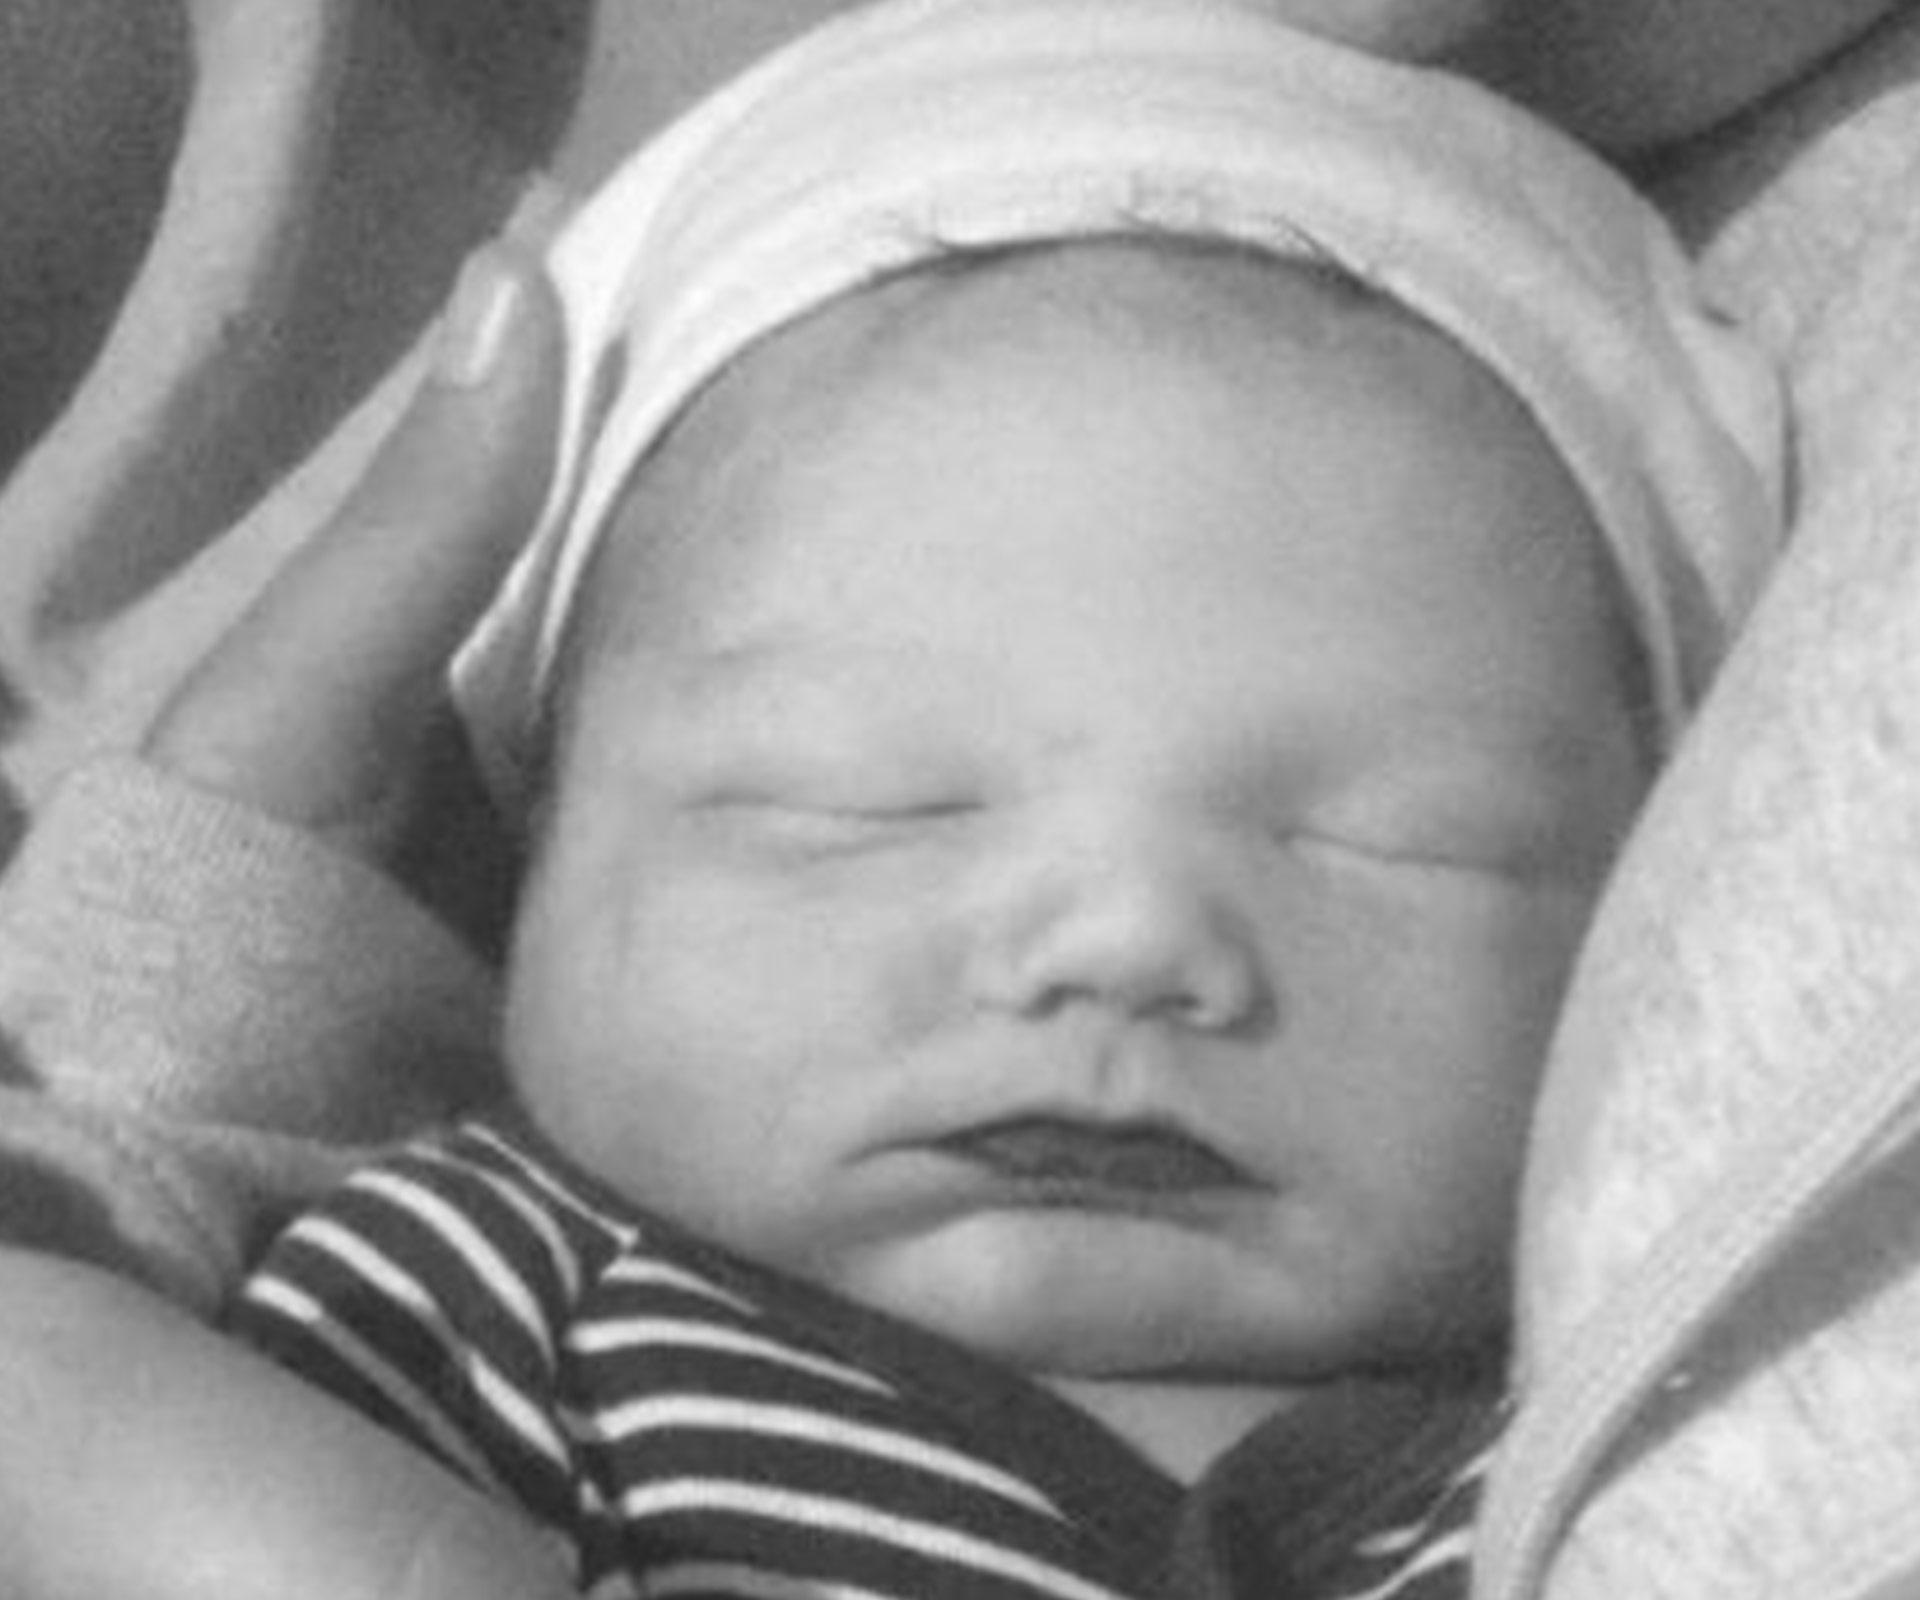 Baby dies after his skull was fractured during C-section